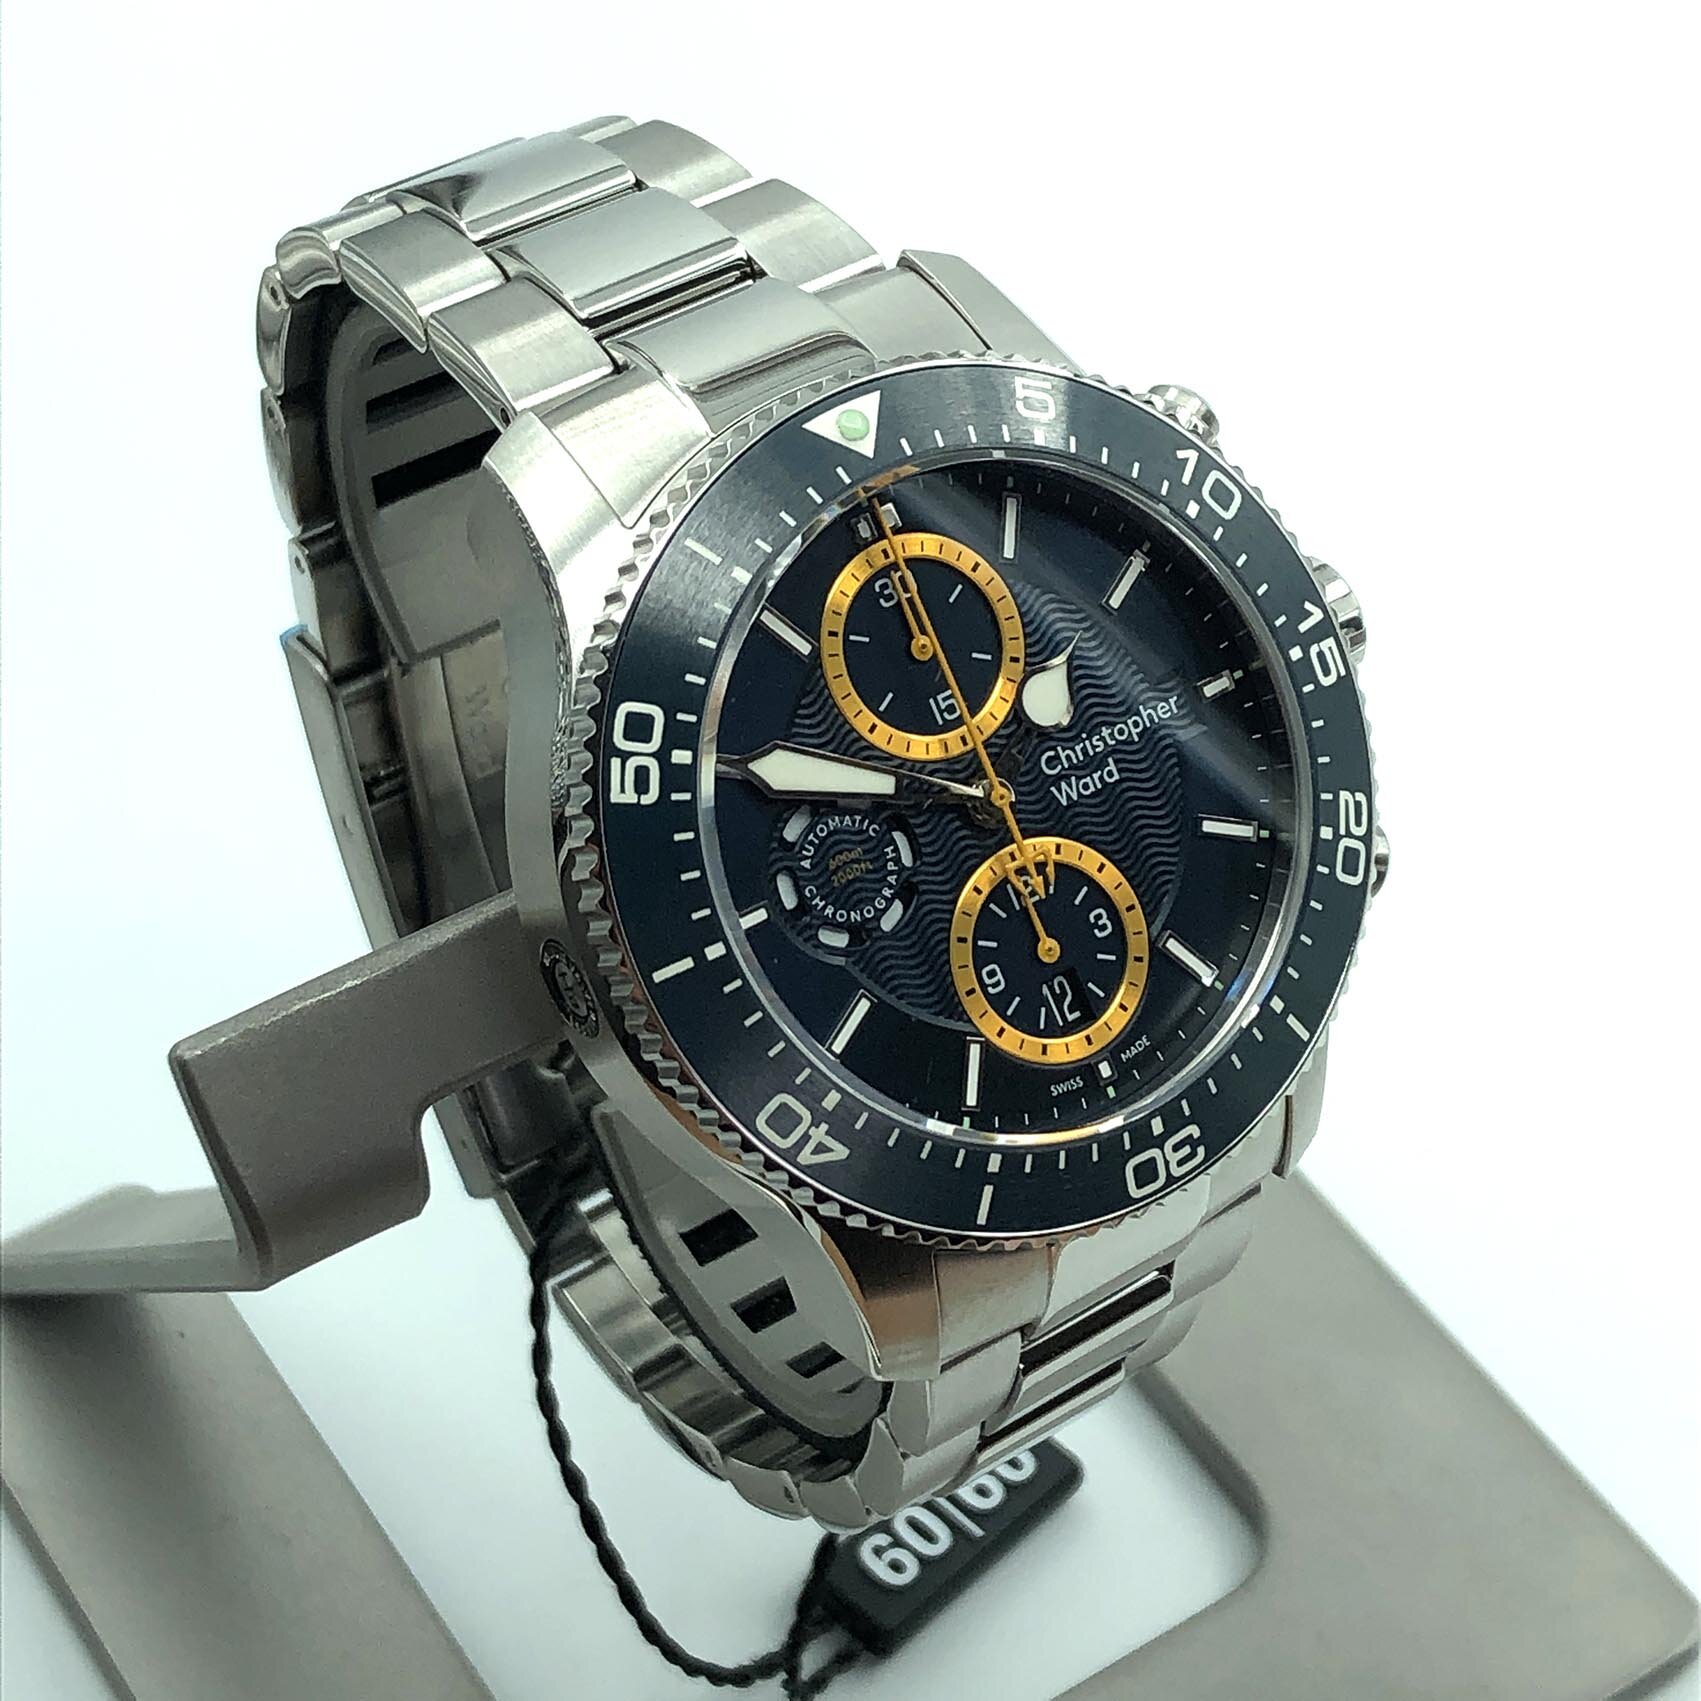 SOLD - C60 Trident Chronograph Pro 600 (2020) — Ward Hoard